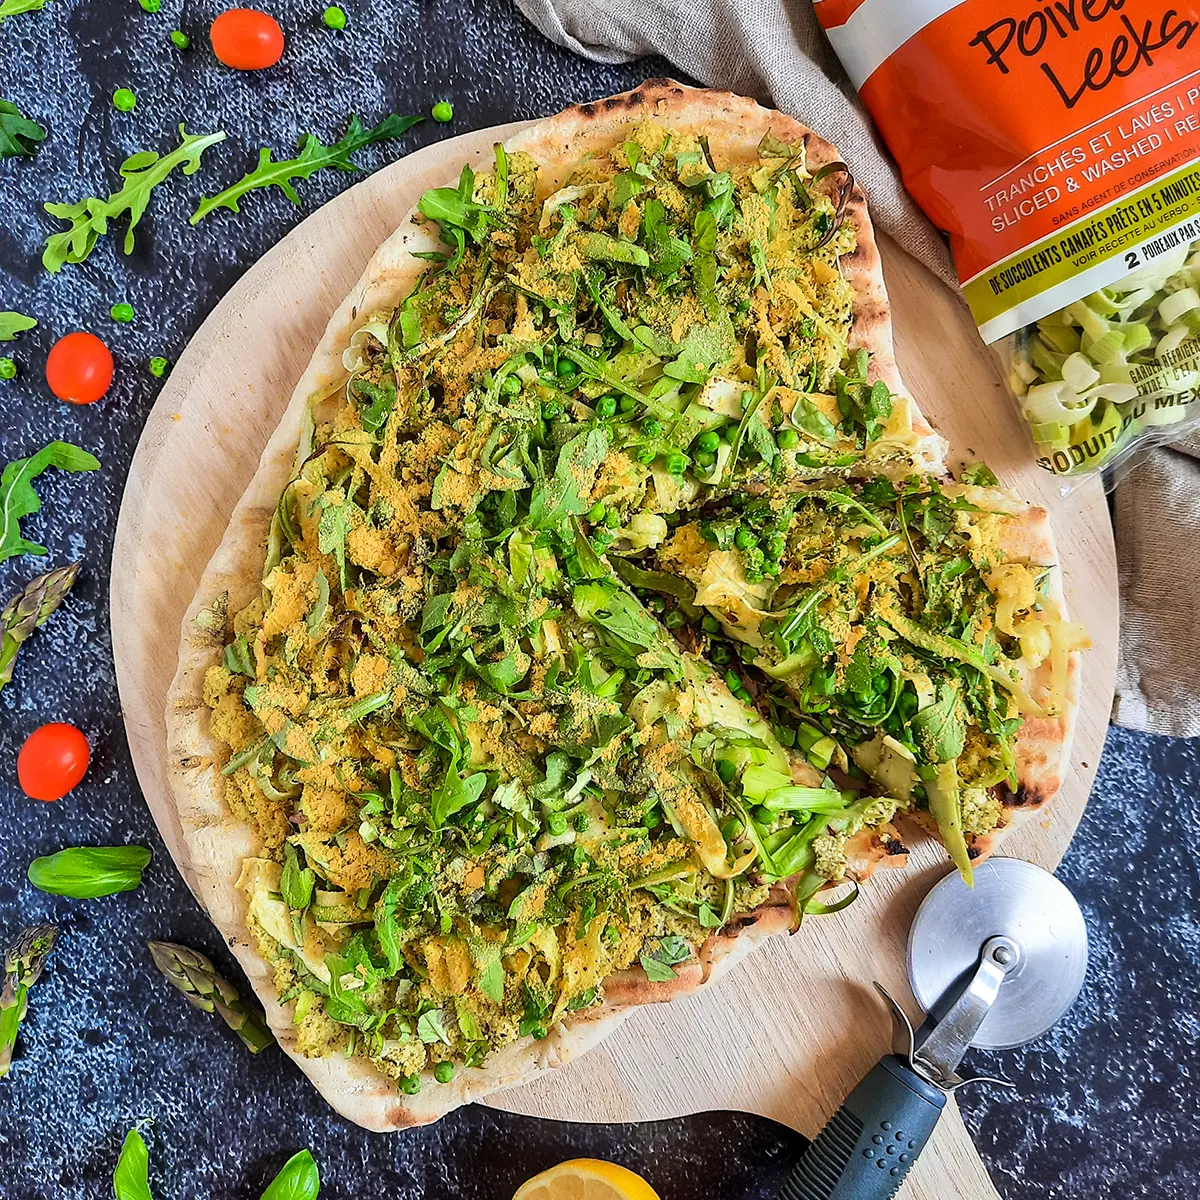 Green BBQ pizza with asparagus ricotta and leeks